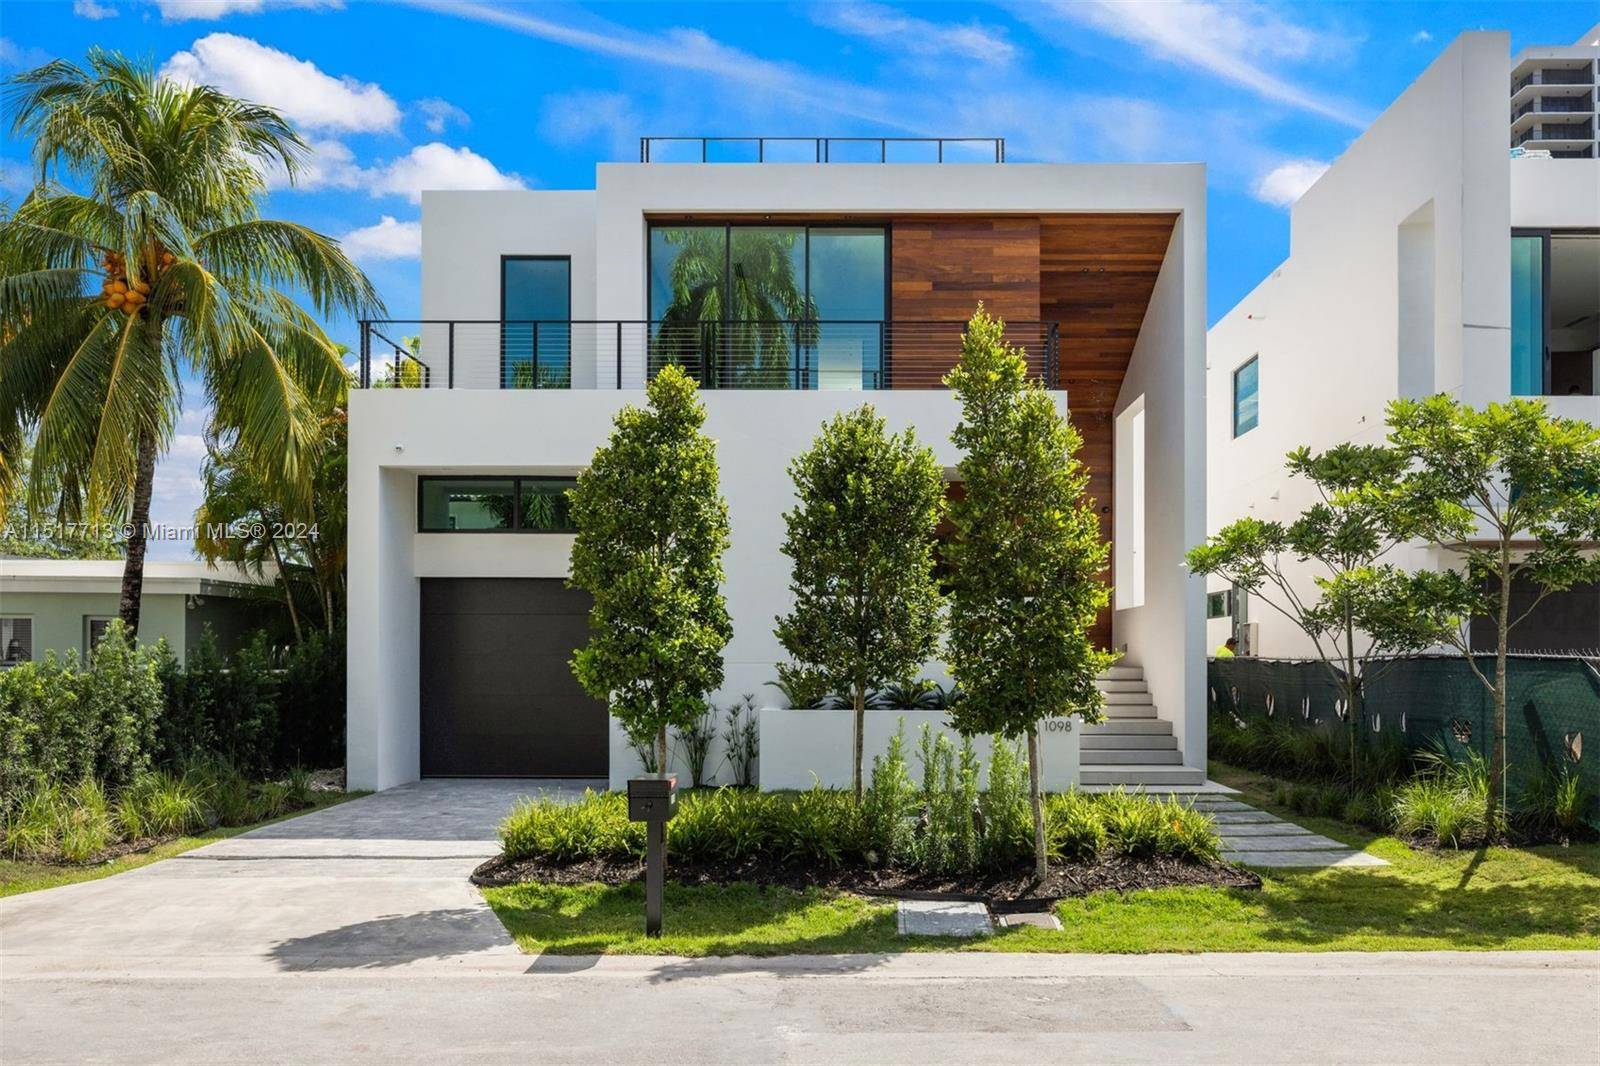 New Construction Just Completed and Staged in a highly sought after area, Venetian Islands.